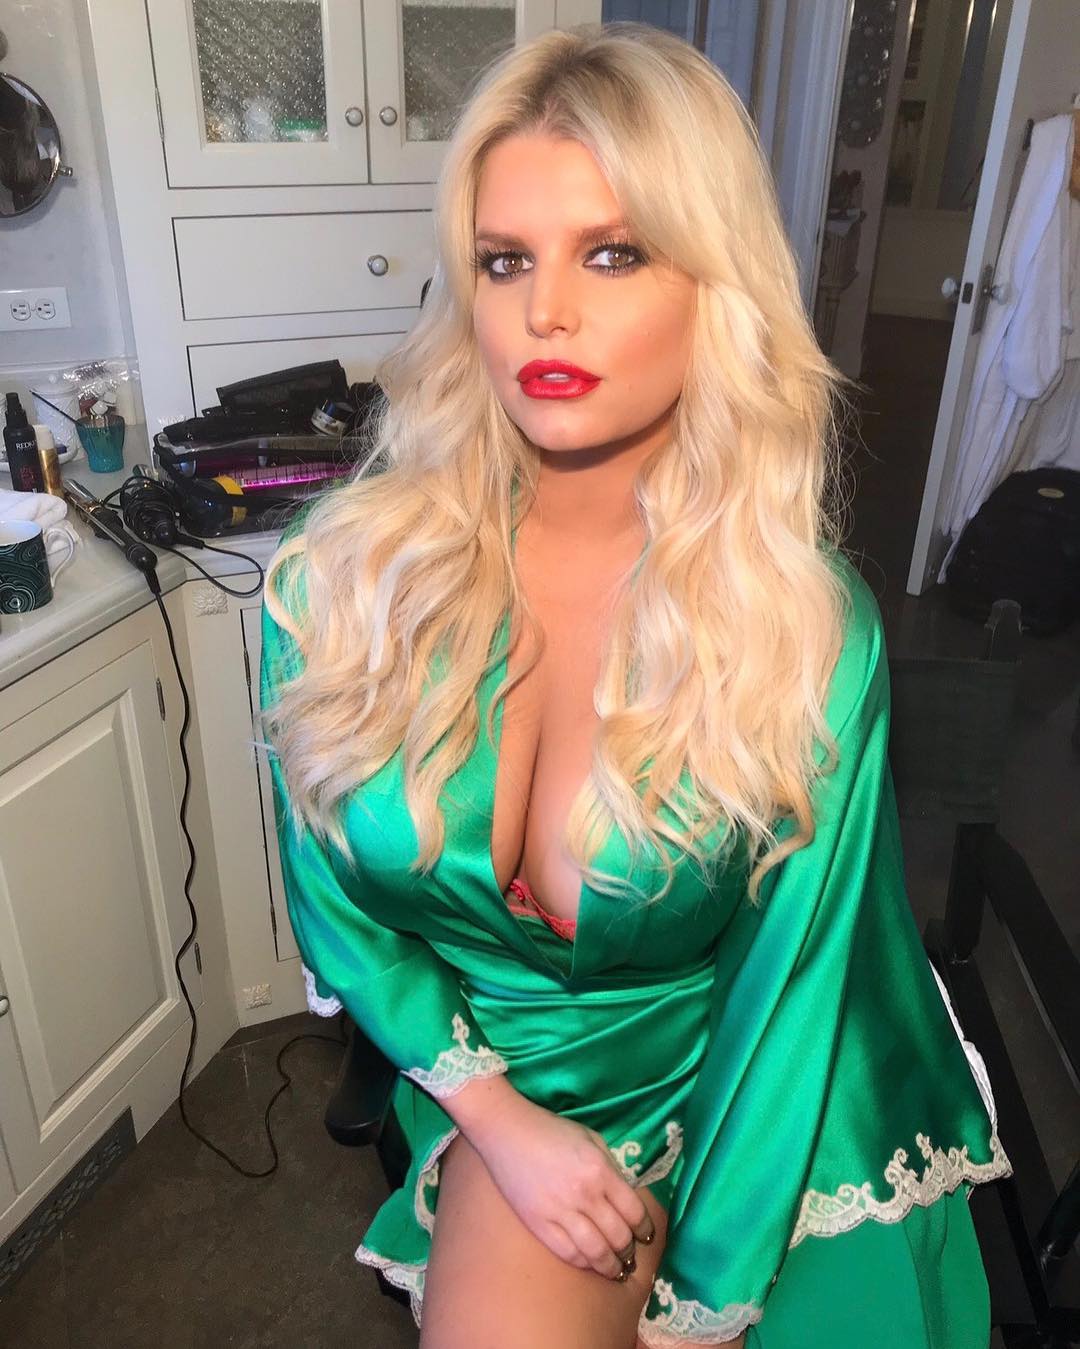 48 Hot And Sexy Pictures Of Jessica Simpson Unravel Her Super Sexual Bikini Body | Best Of Comic Books